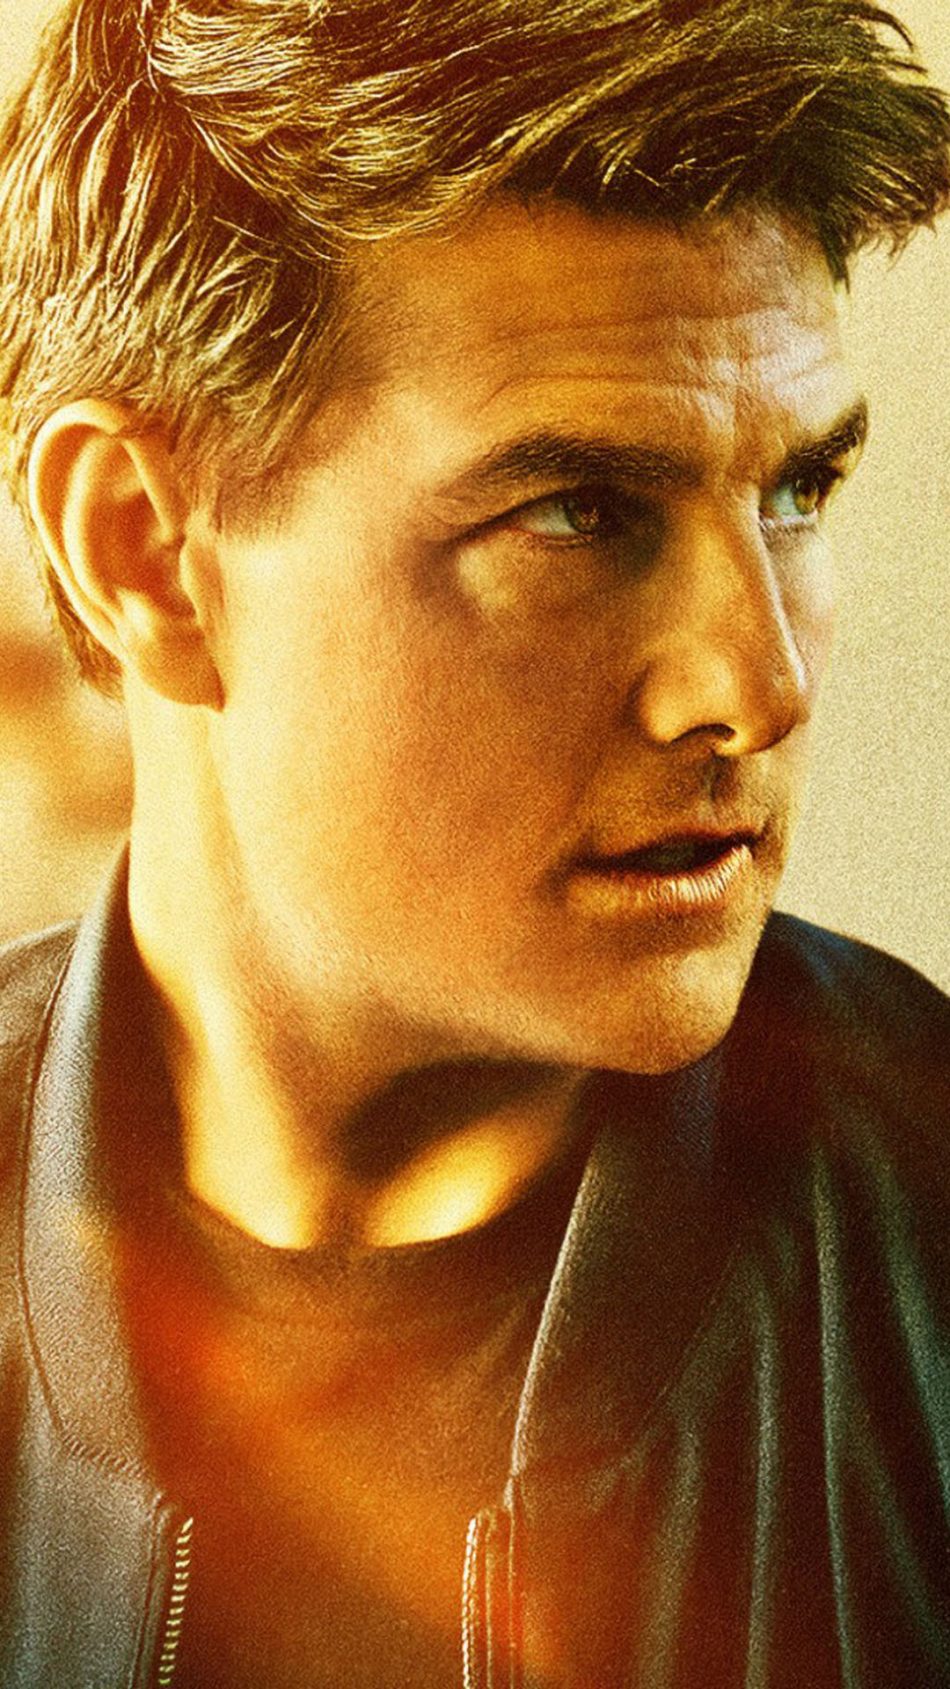 Tom Cruise As Ethan Hunt In Mission Impossible Fallout 4K Ultra HD Mobile Wallpaper